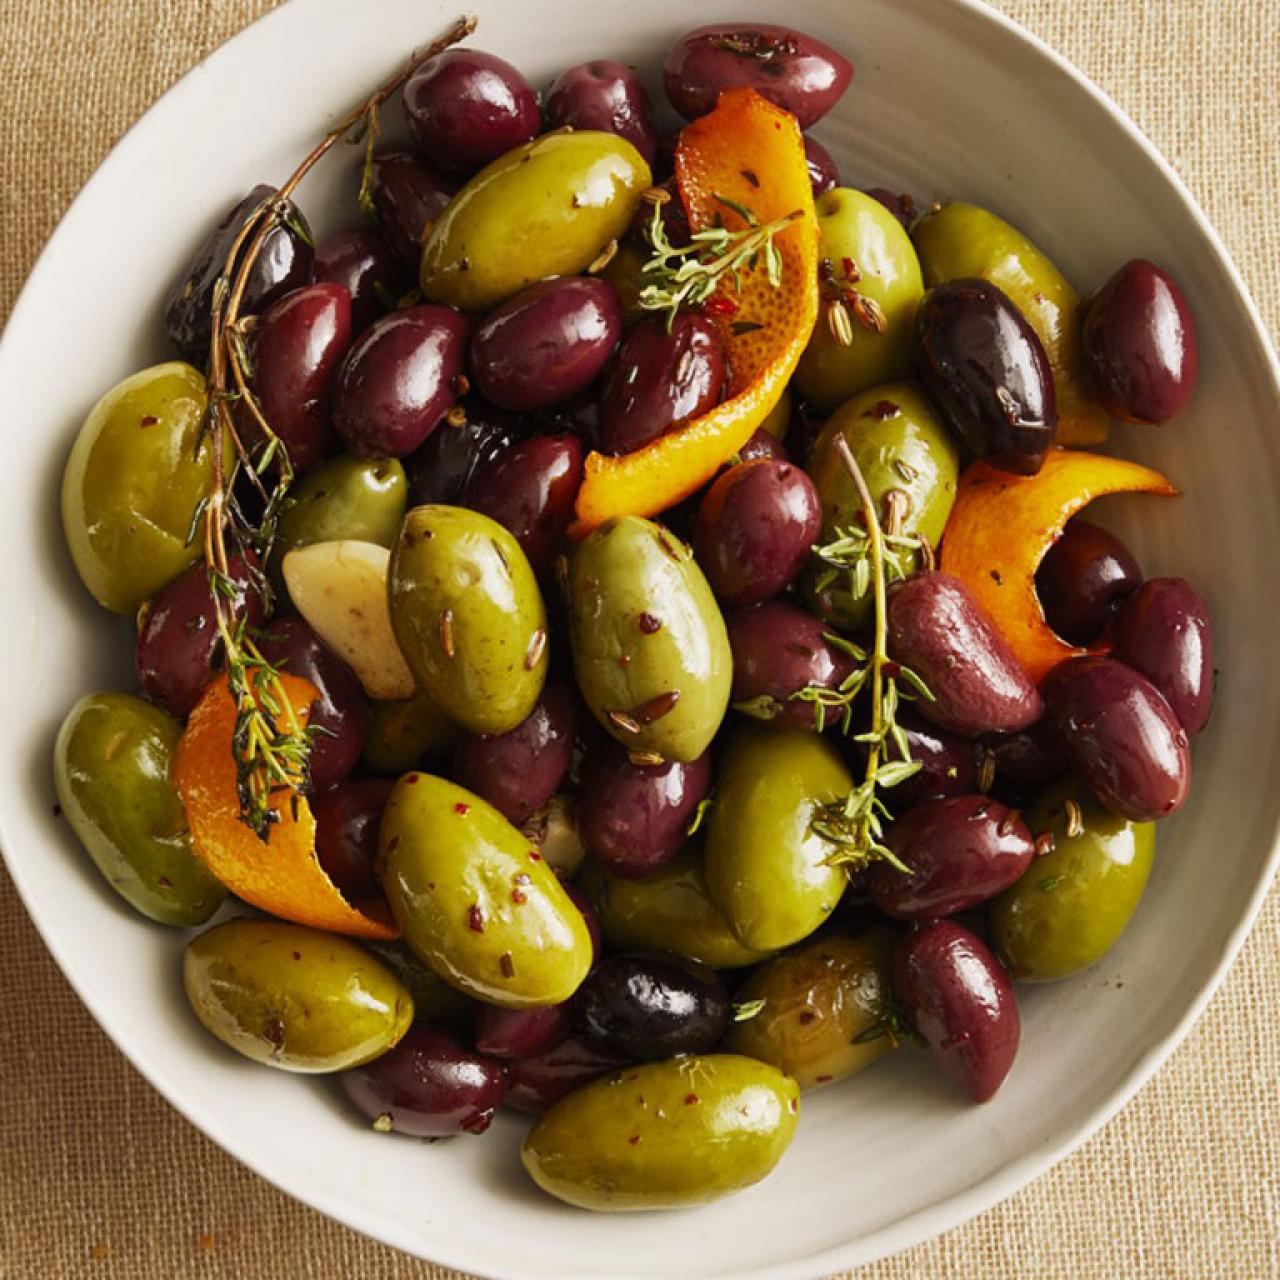 12 Popular Types of Olives and How to Use Them